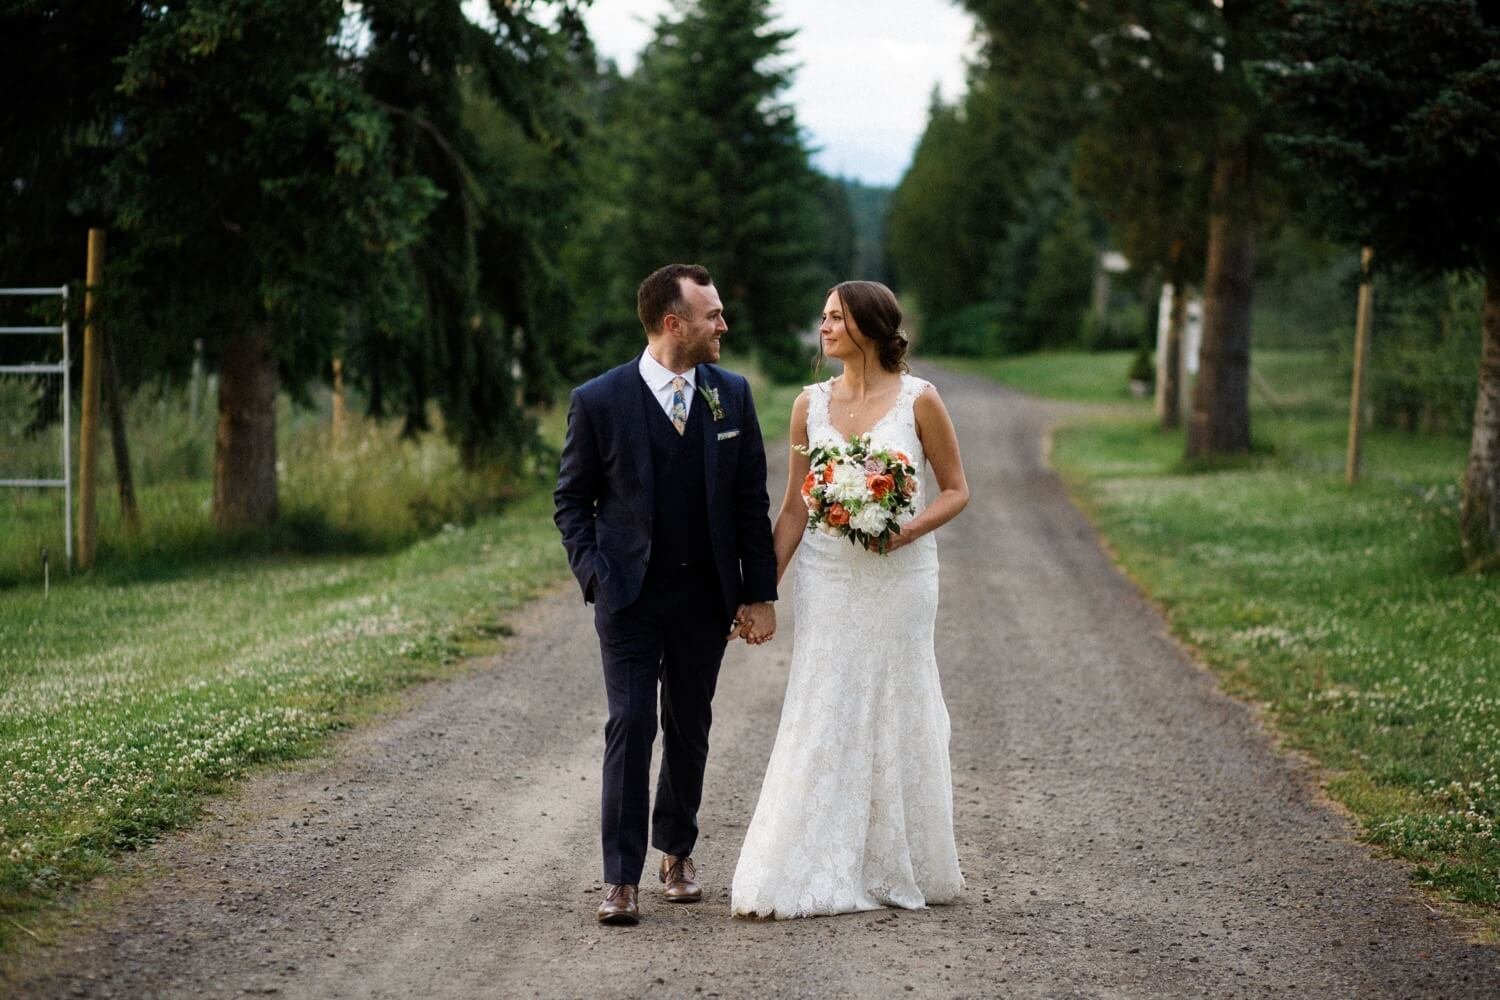 099_Mount Hood Organic Farms Wedding-Bride and groom hold hands and walk together down gravel road.jpg